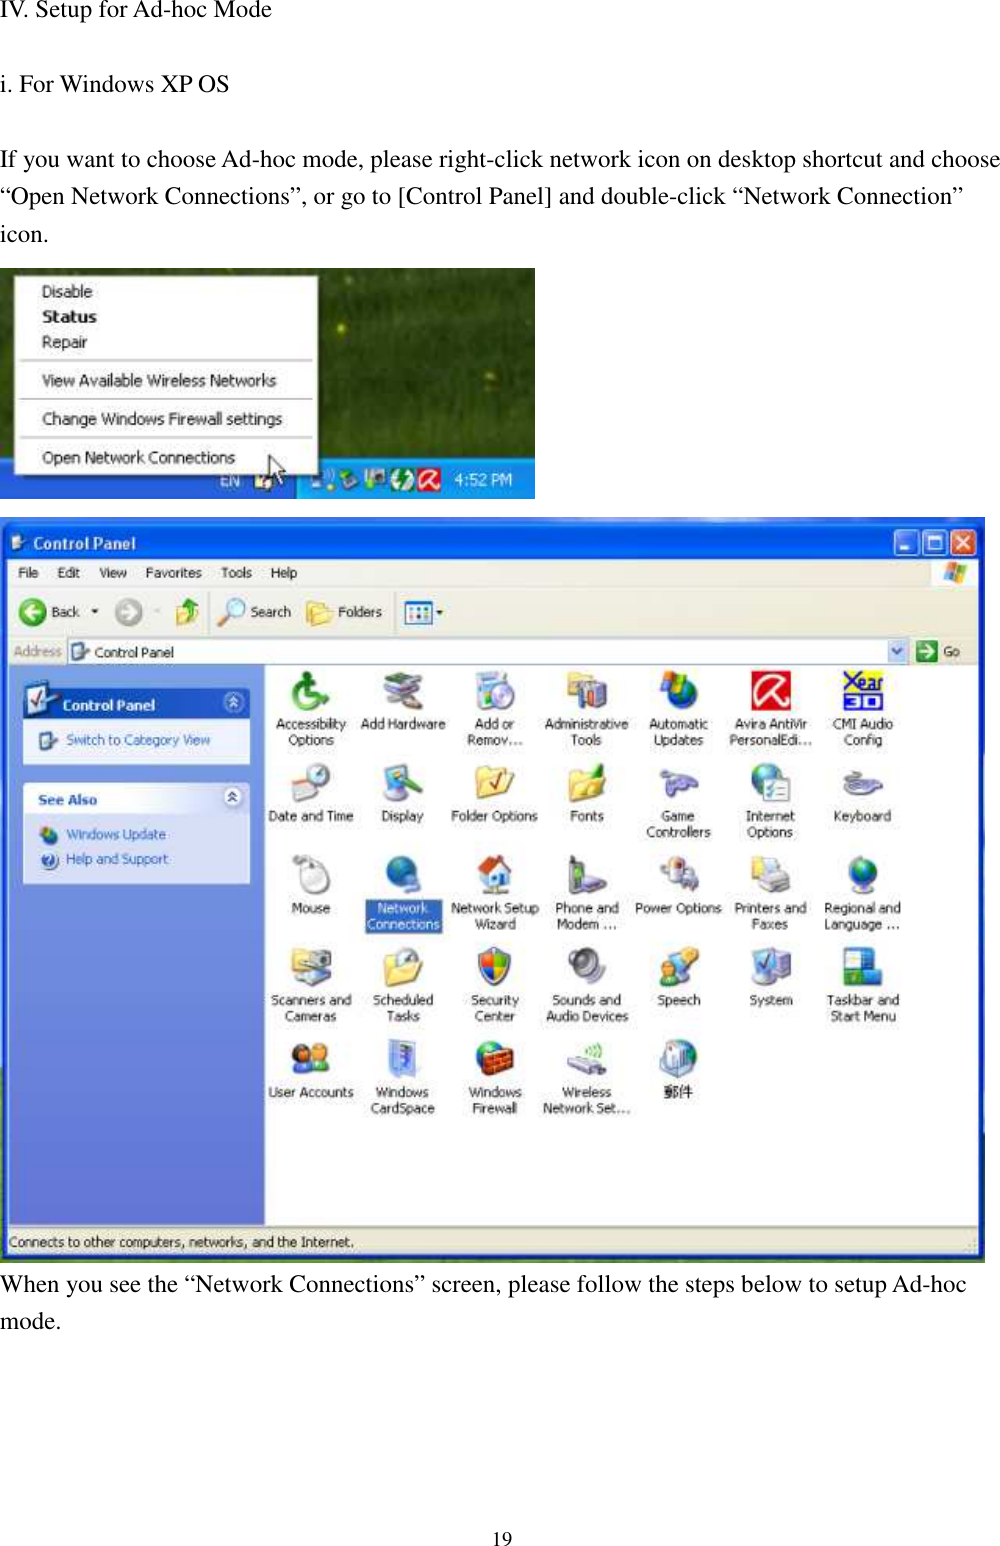   19IV. Setup for Ad-hoc Mode  i. For Windows XP OS  If you want to choose Ad-hoc mode, please right-click network icon on desktop shortcut and choose “Open Network Connections”, or go to [Control Panel] and double-click “Network Connection” icon.     When you see the “Network Connections” screen, please follow the steps below to setup Ad-hoc mode.      